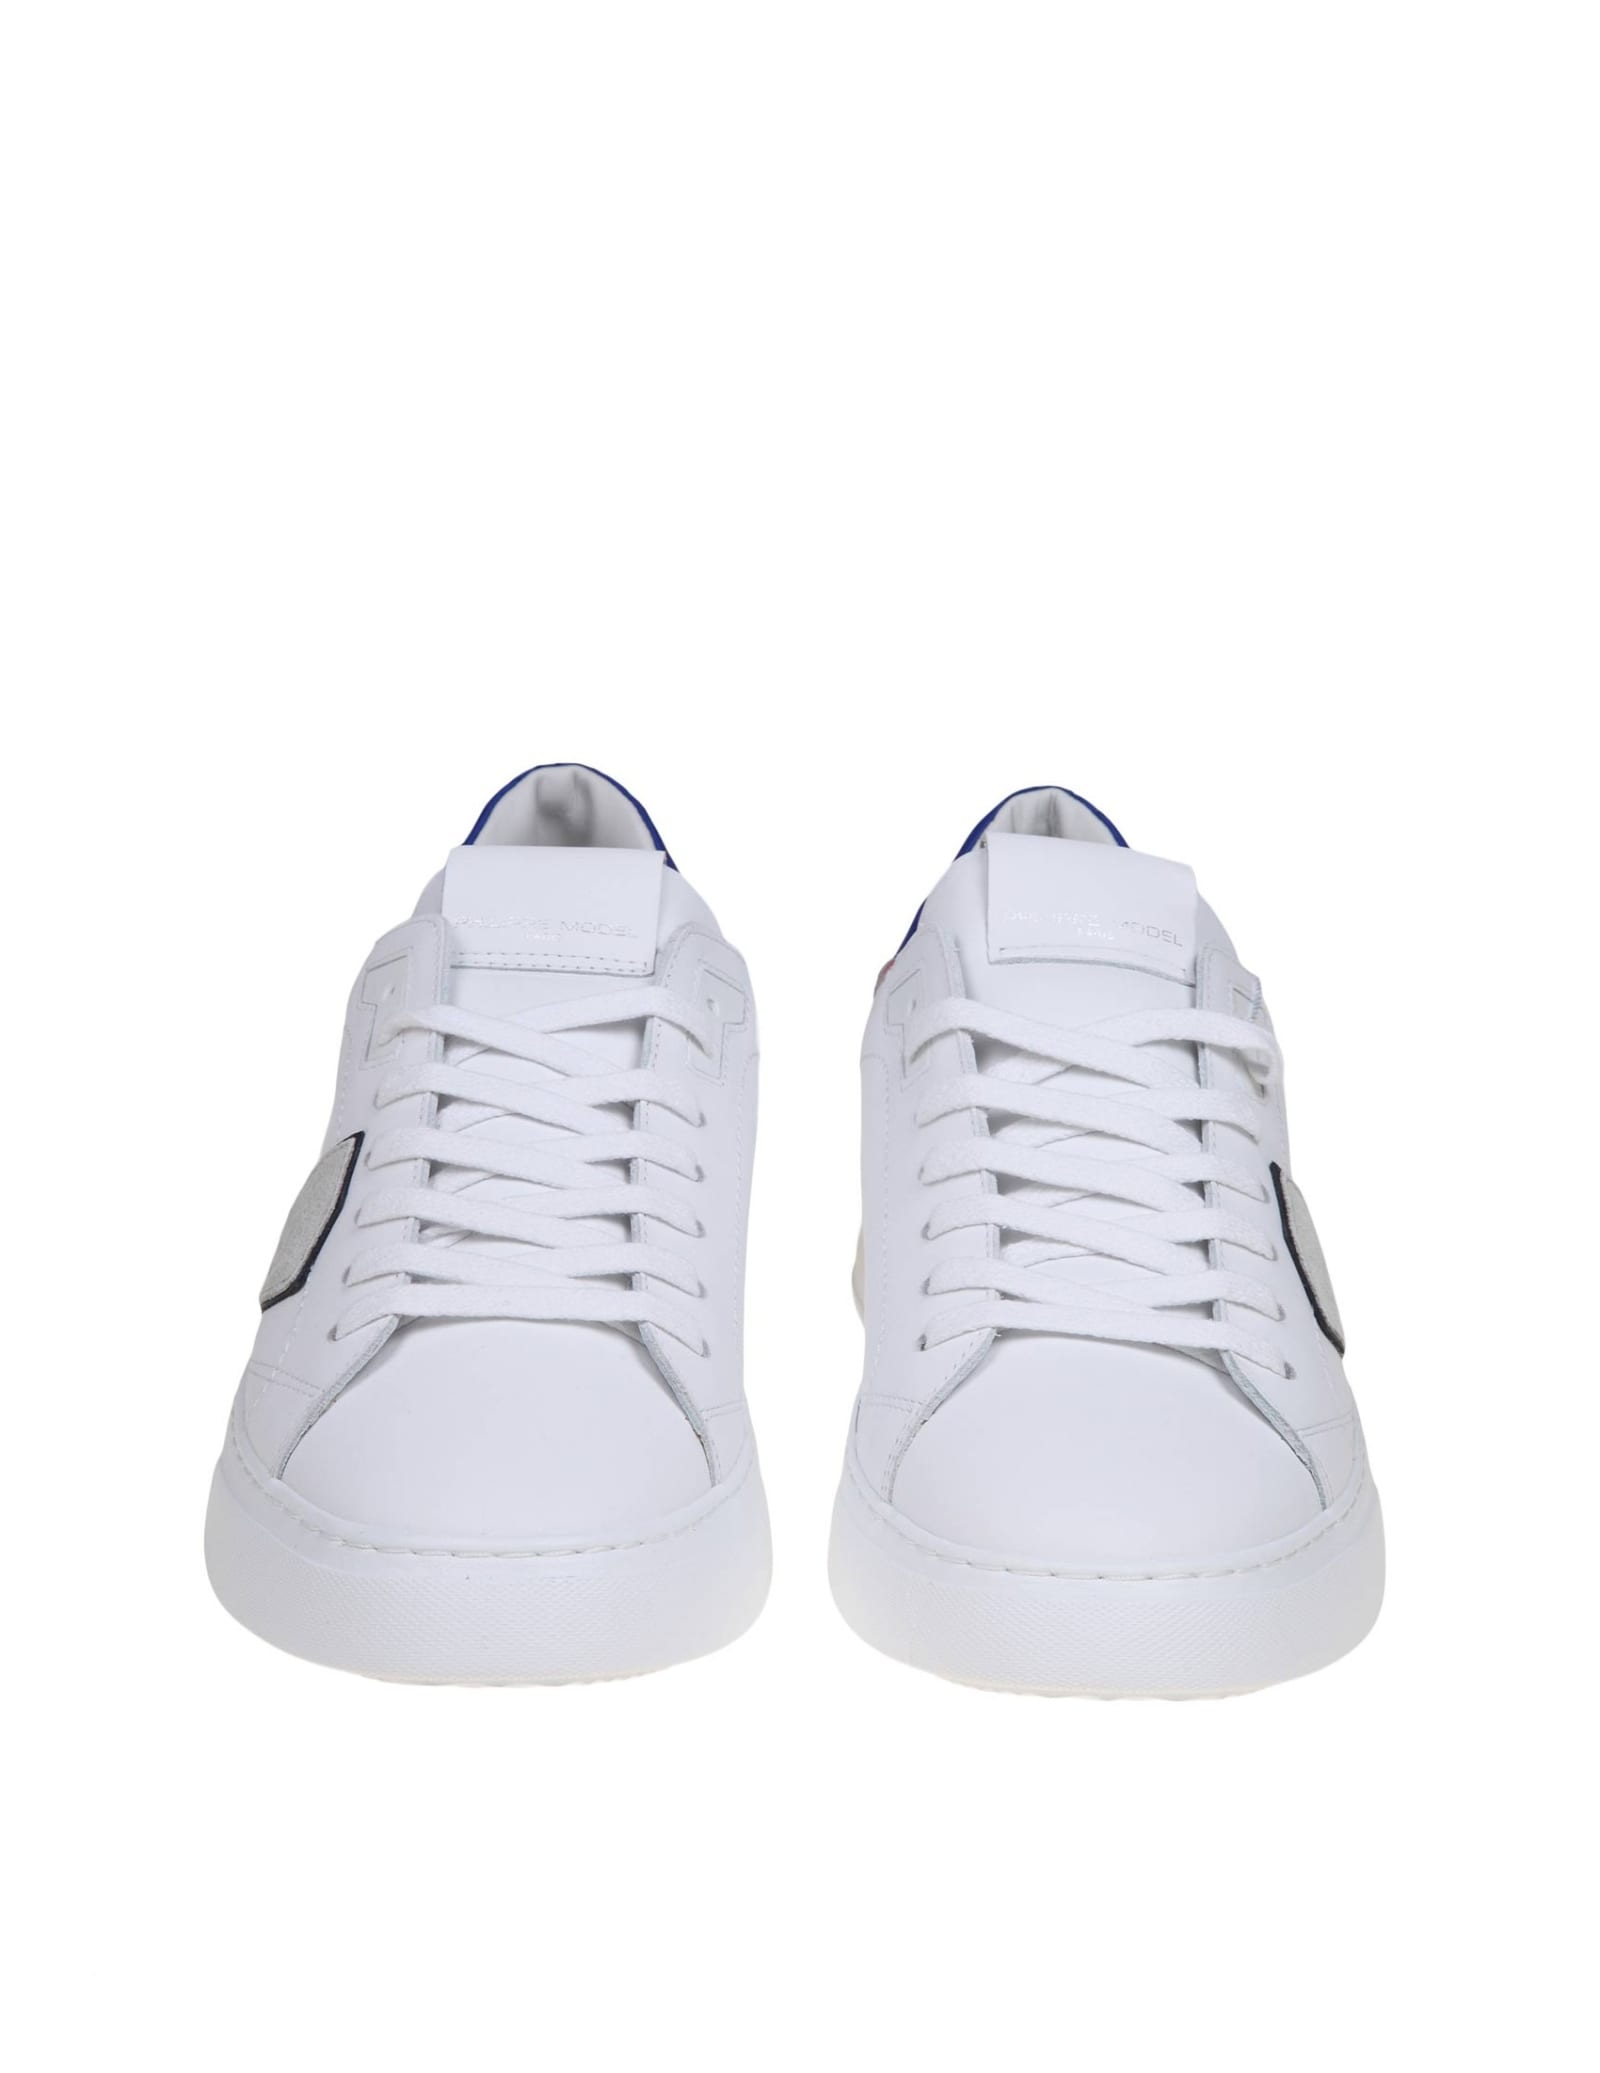 Shop Philippe Model Temple Low Sneakers In White And Blue Leather In White/bluette